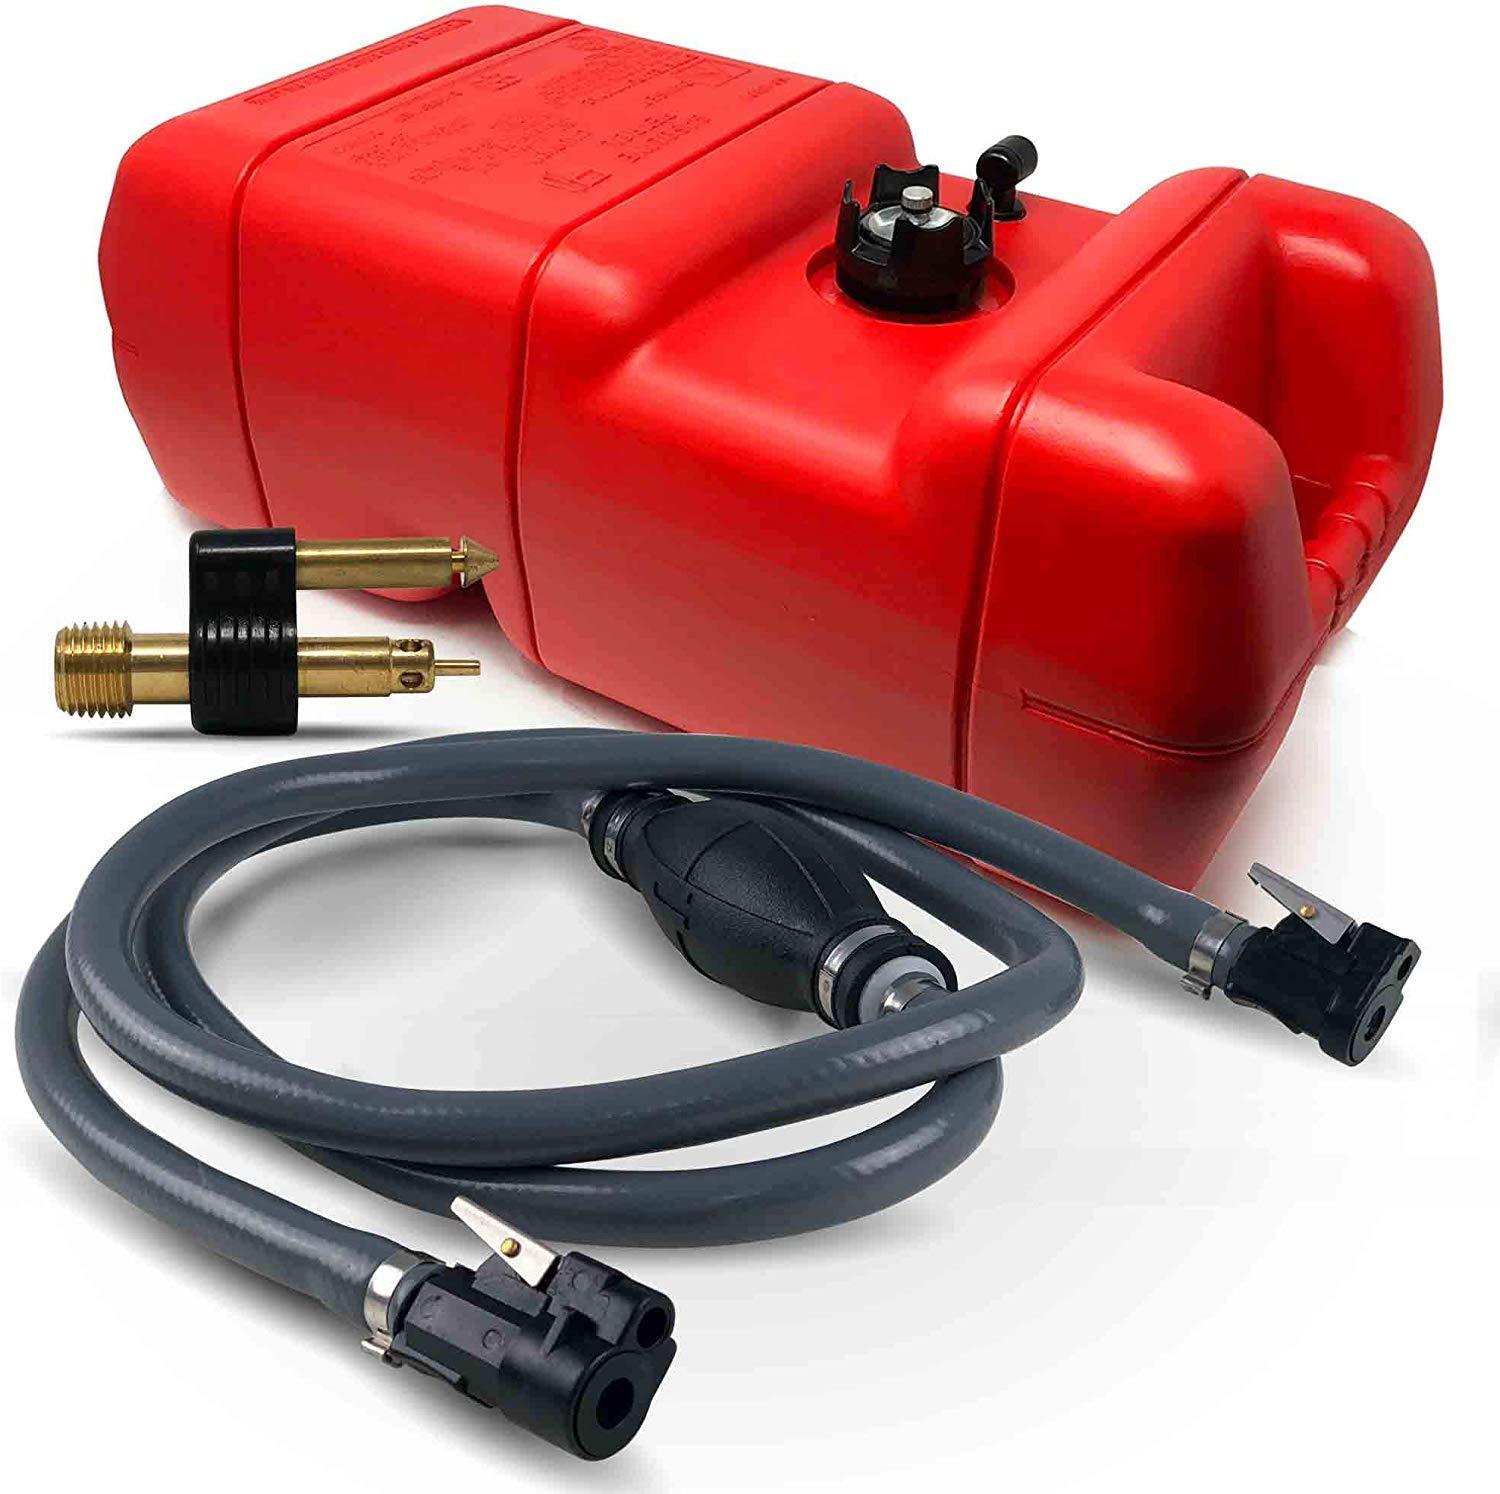 6 Gallon Fuel Tank Portable Kit for OMC, Johnson, Evinrude Engine Connection, 3/8" Hose - Five Oceans-Canadian Marine &amp; Outdoor Equipment